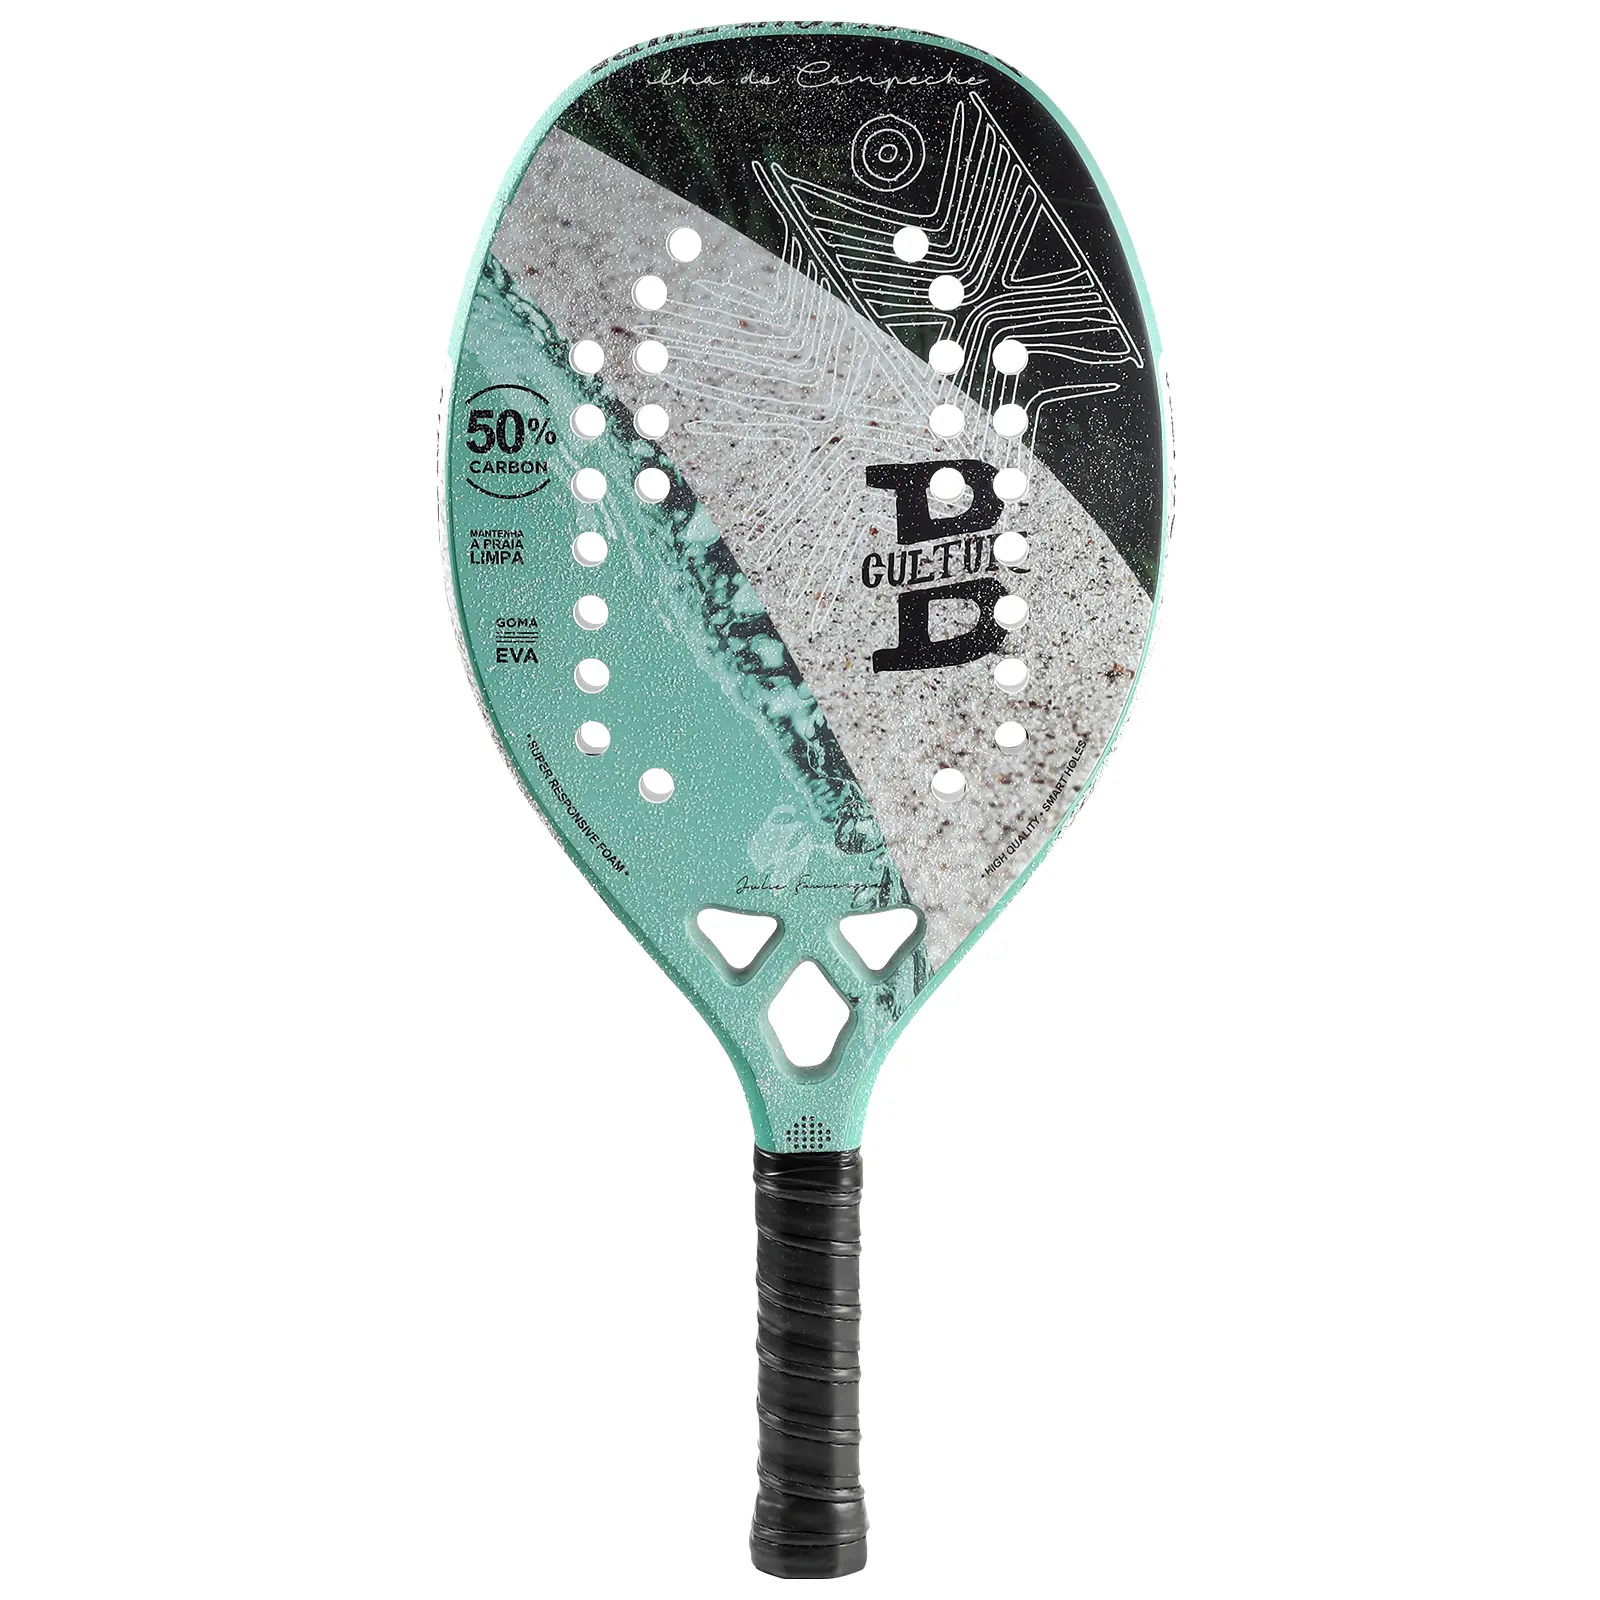 Ready to Ship AMA New Arrival Hot Selling Full Carbon Beach Tennis Racket for beginners